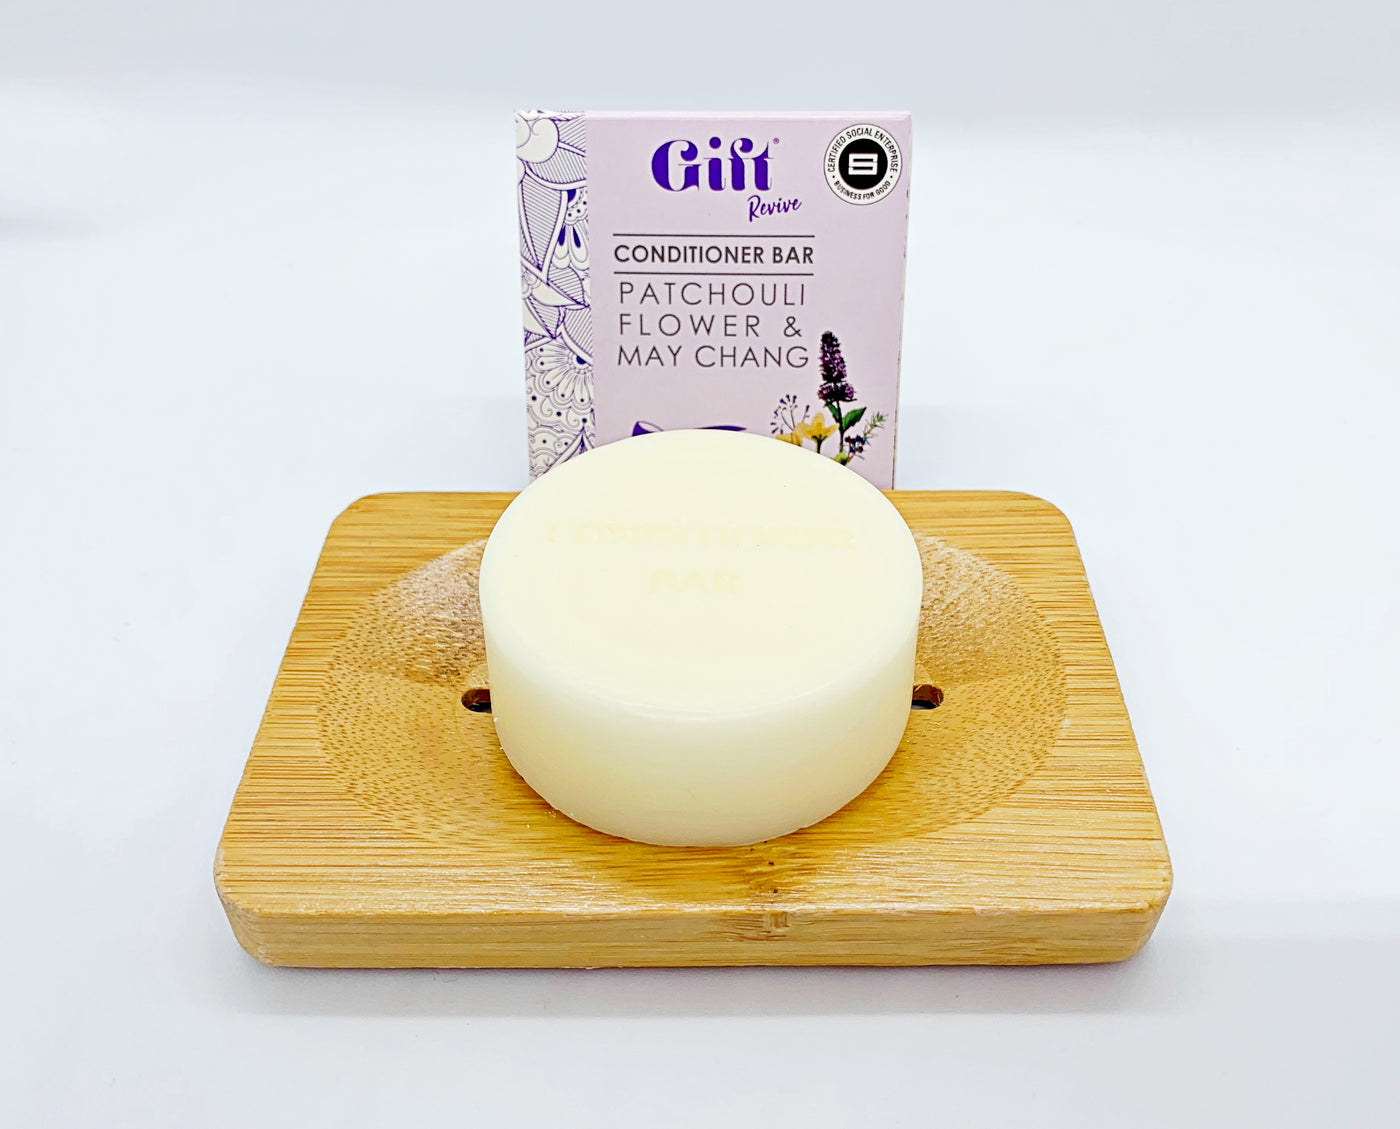 Revive Hair Conditioner Bar - Patchouli, May Chang, Henna & Juniper - giftwellness